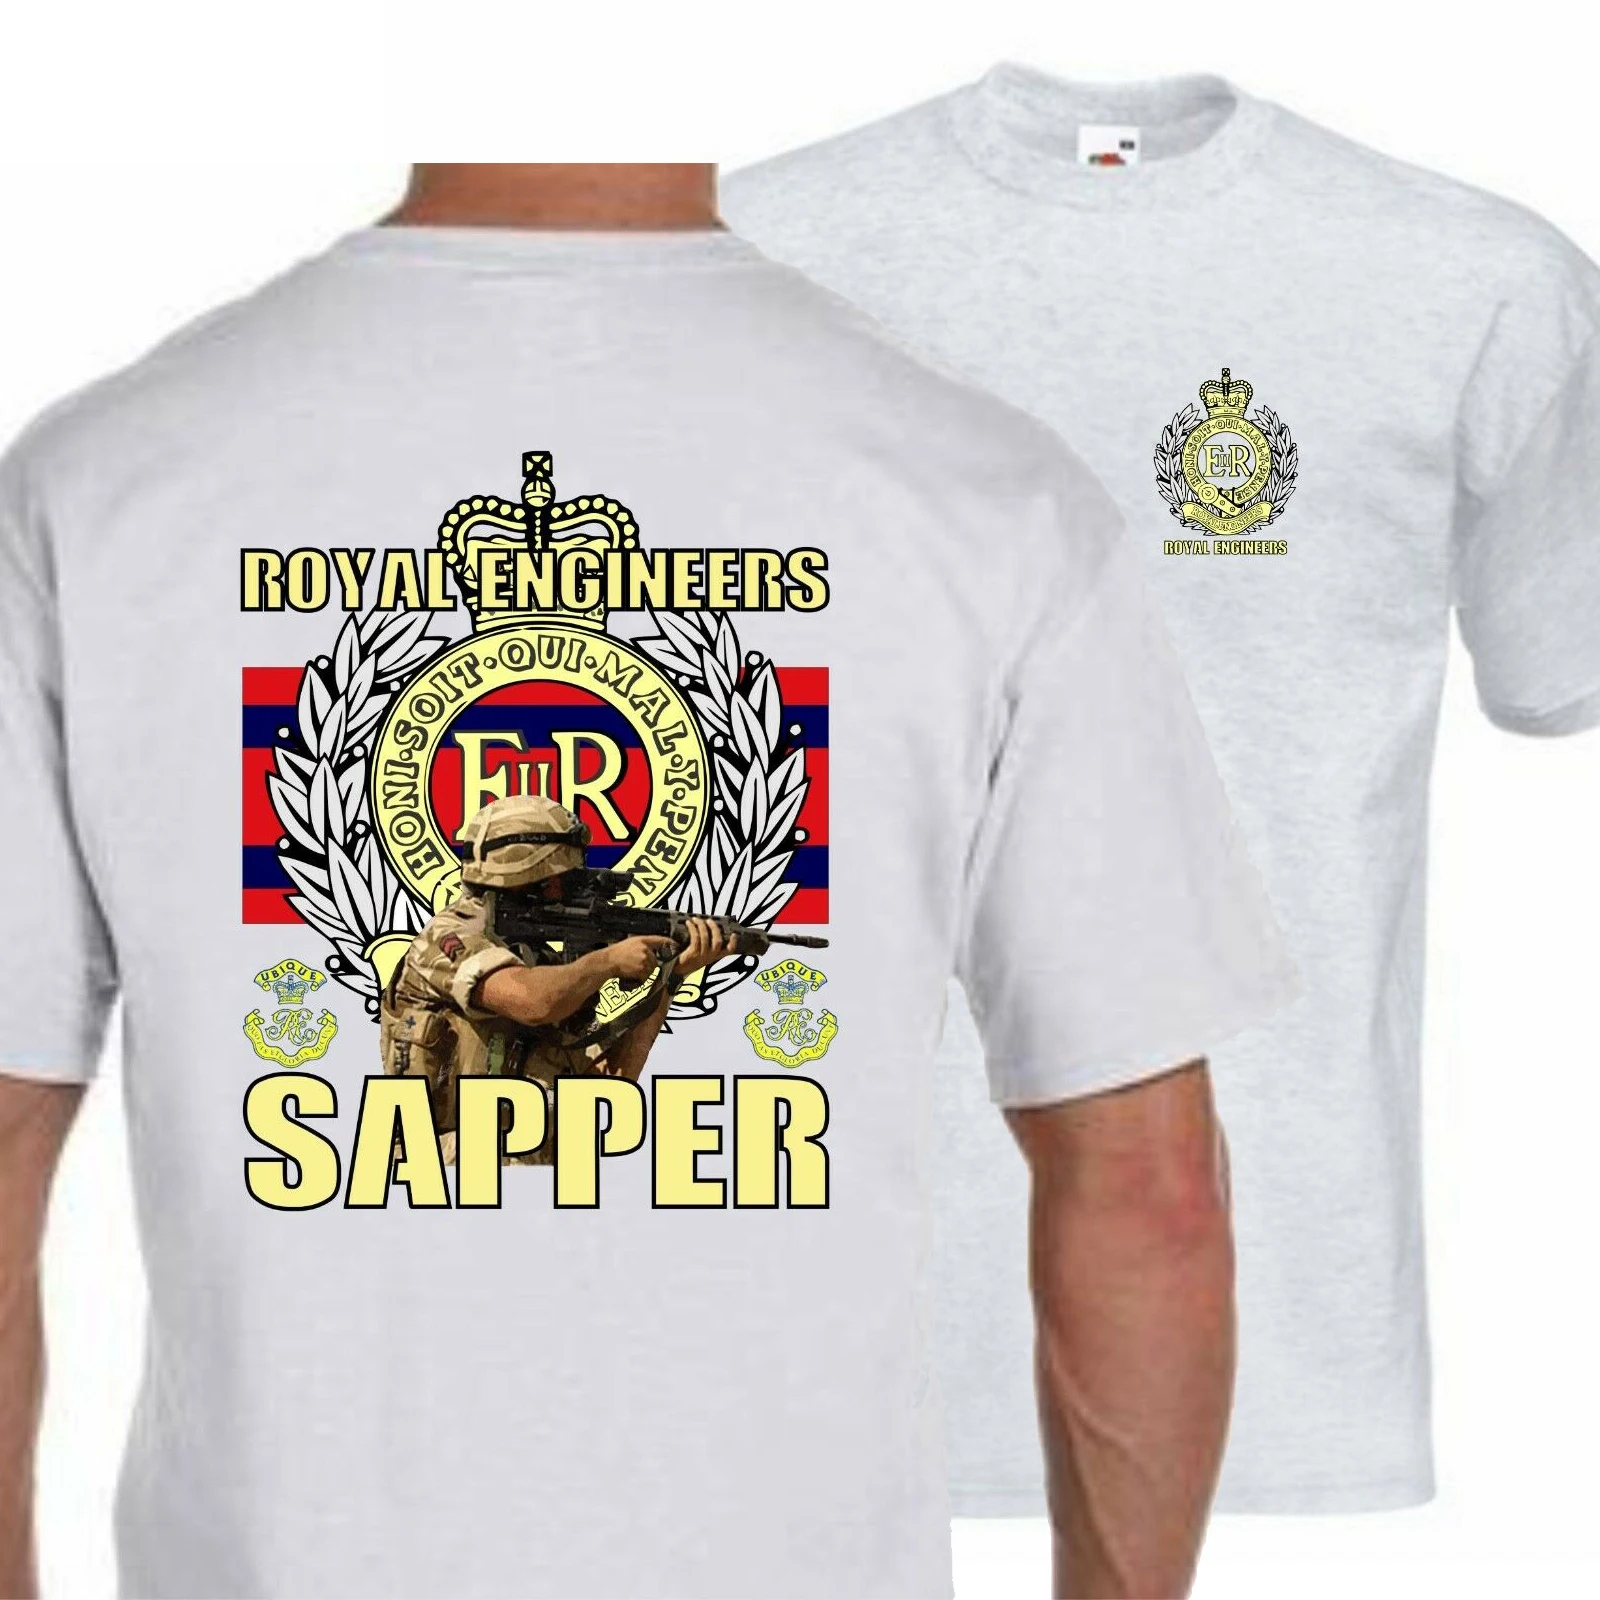 

British Army Royal Engineers Sapper T Shirt. Short Sleeve 100% Cotton Casual T-shirts Loose Top Size S-3XL